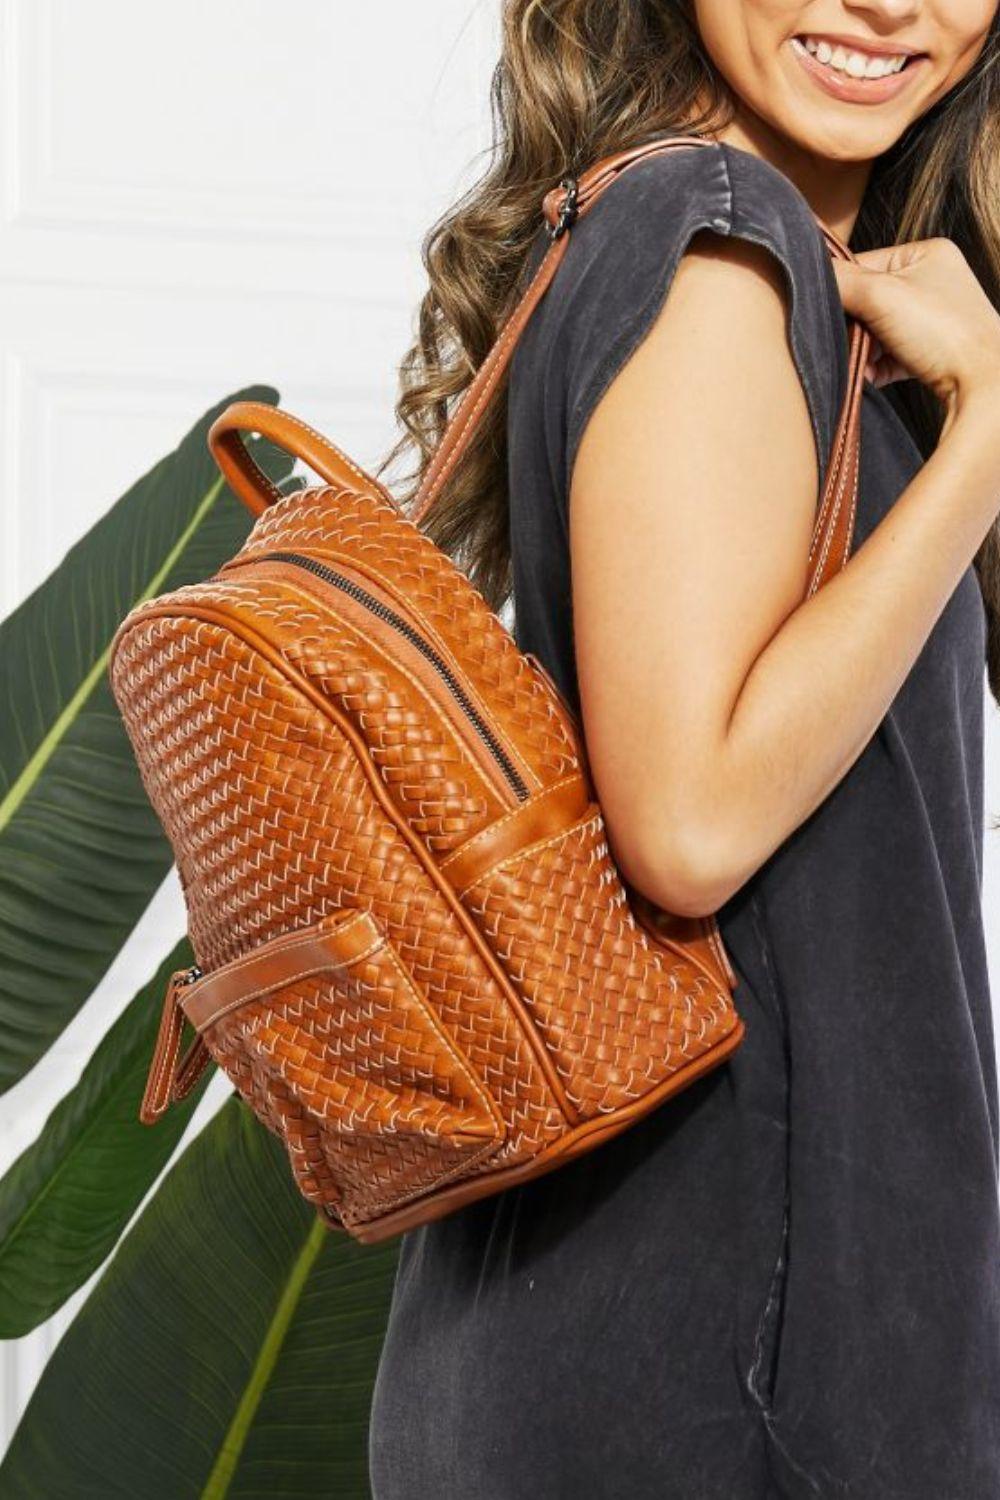 SHOMICO Certainly Chic Faux Leather Woven Backpack - Flyclothing LLC